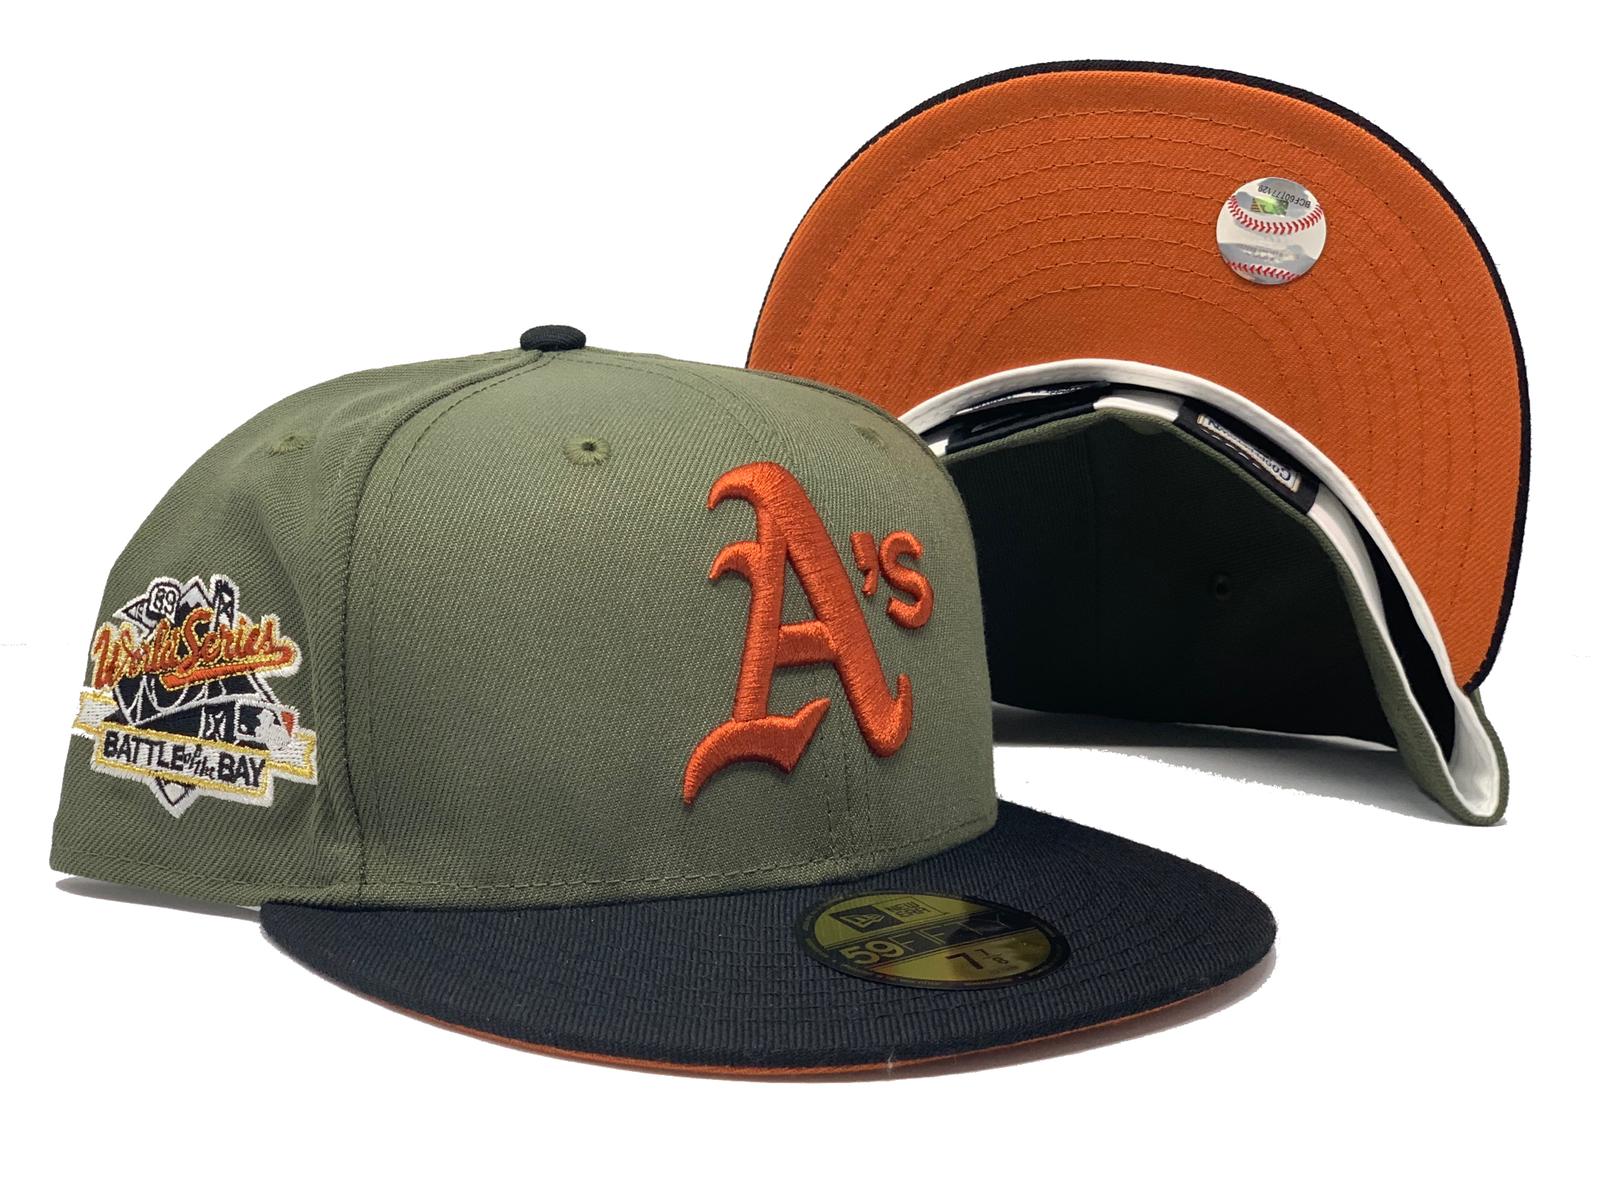 New Era SP Exclusive Rust Oakland A's 59FIFTY Mens Fitted Hat (Orange)